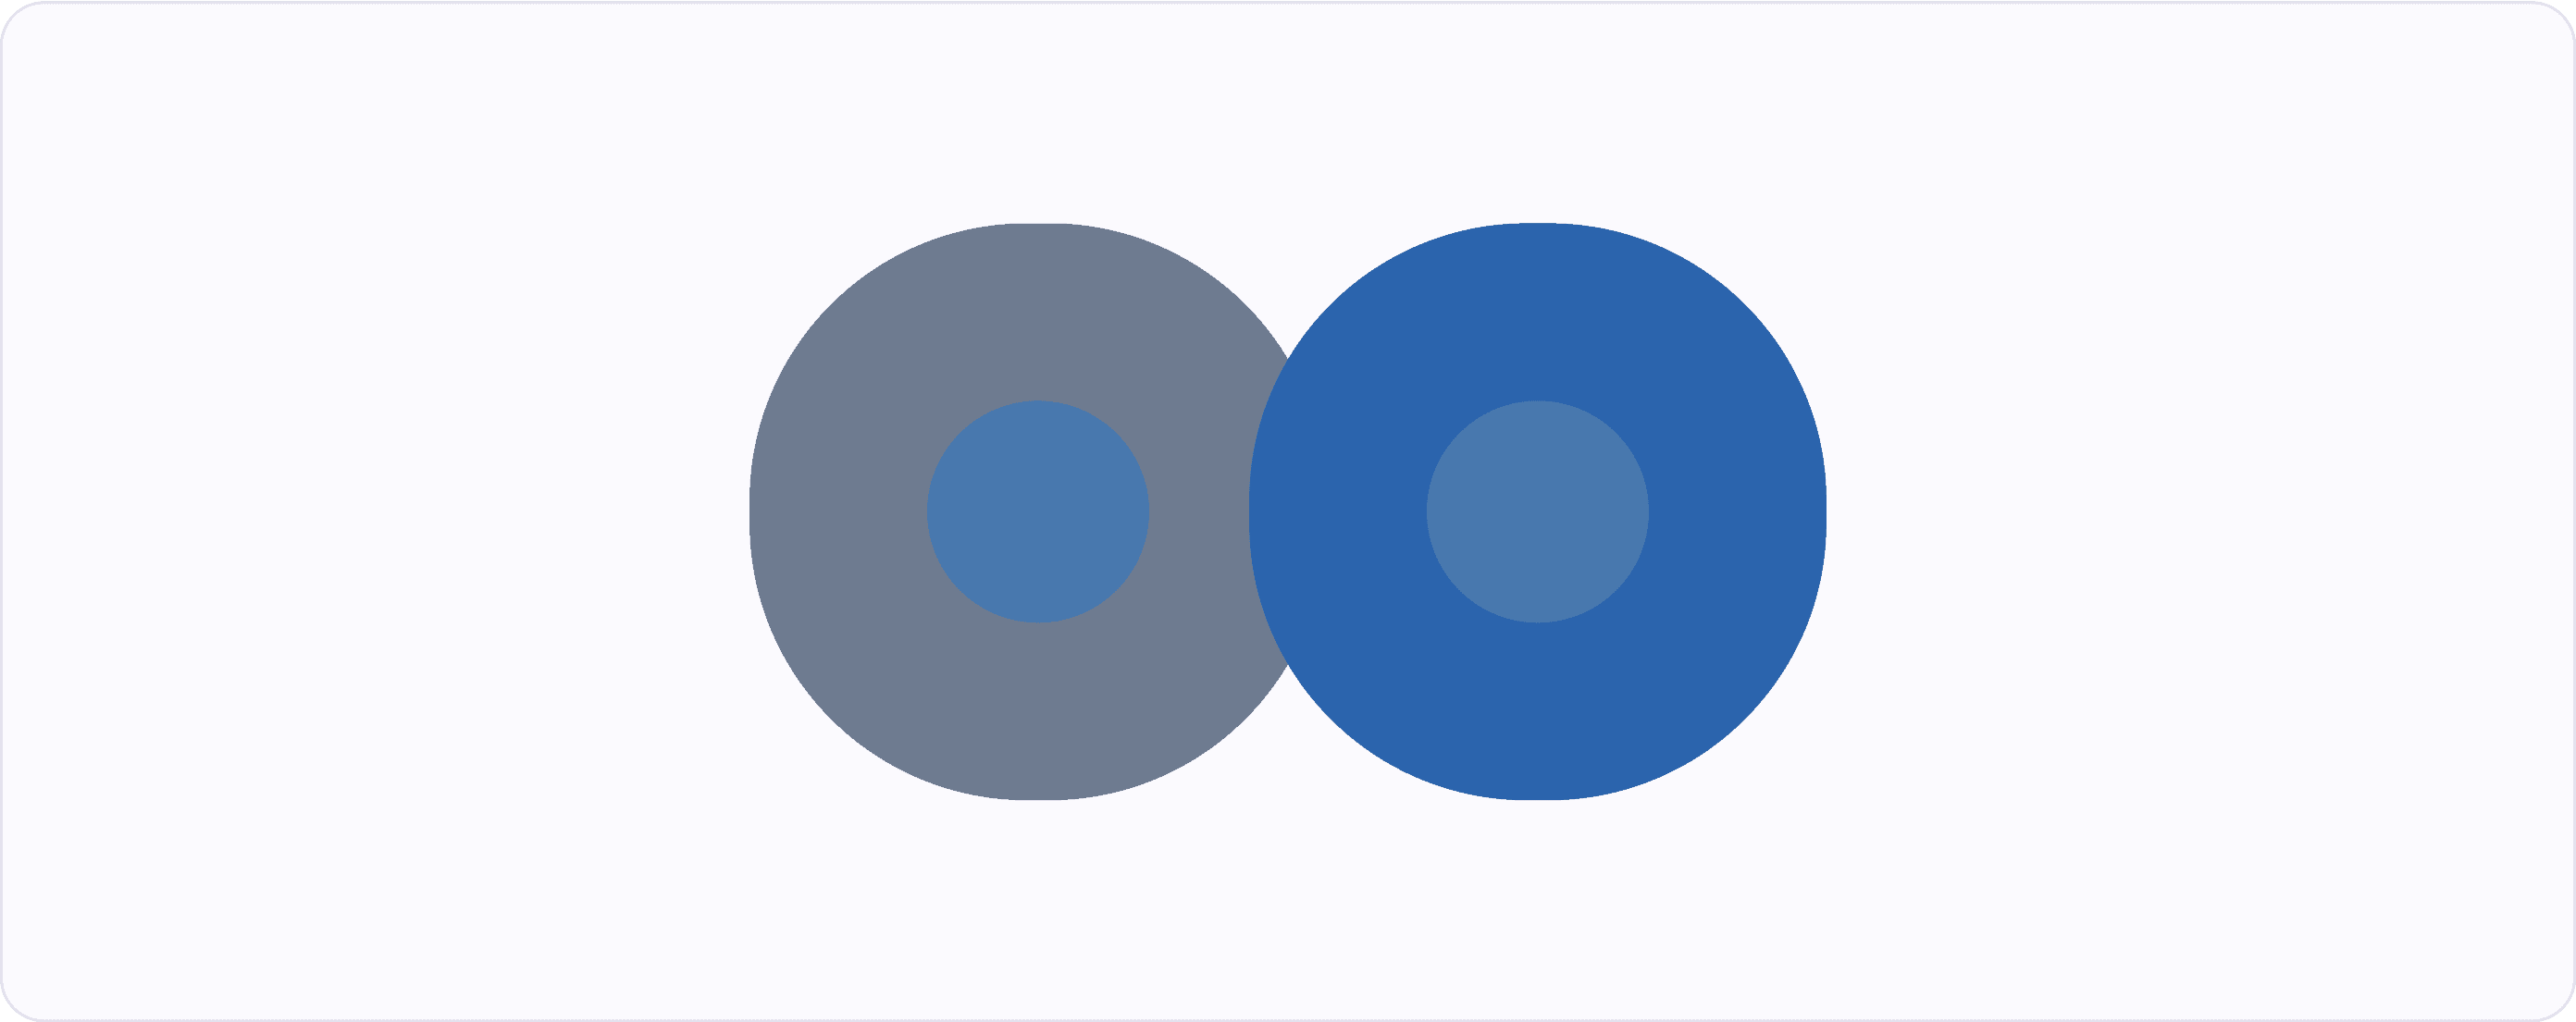 Two circles with differently saturated blue with a blue dot inside them. Showing how the percieved saturation of the dot changes.